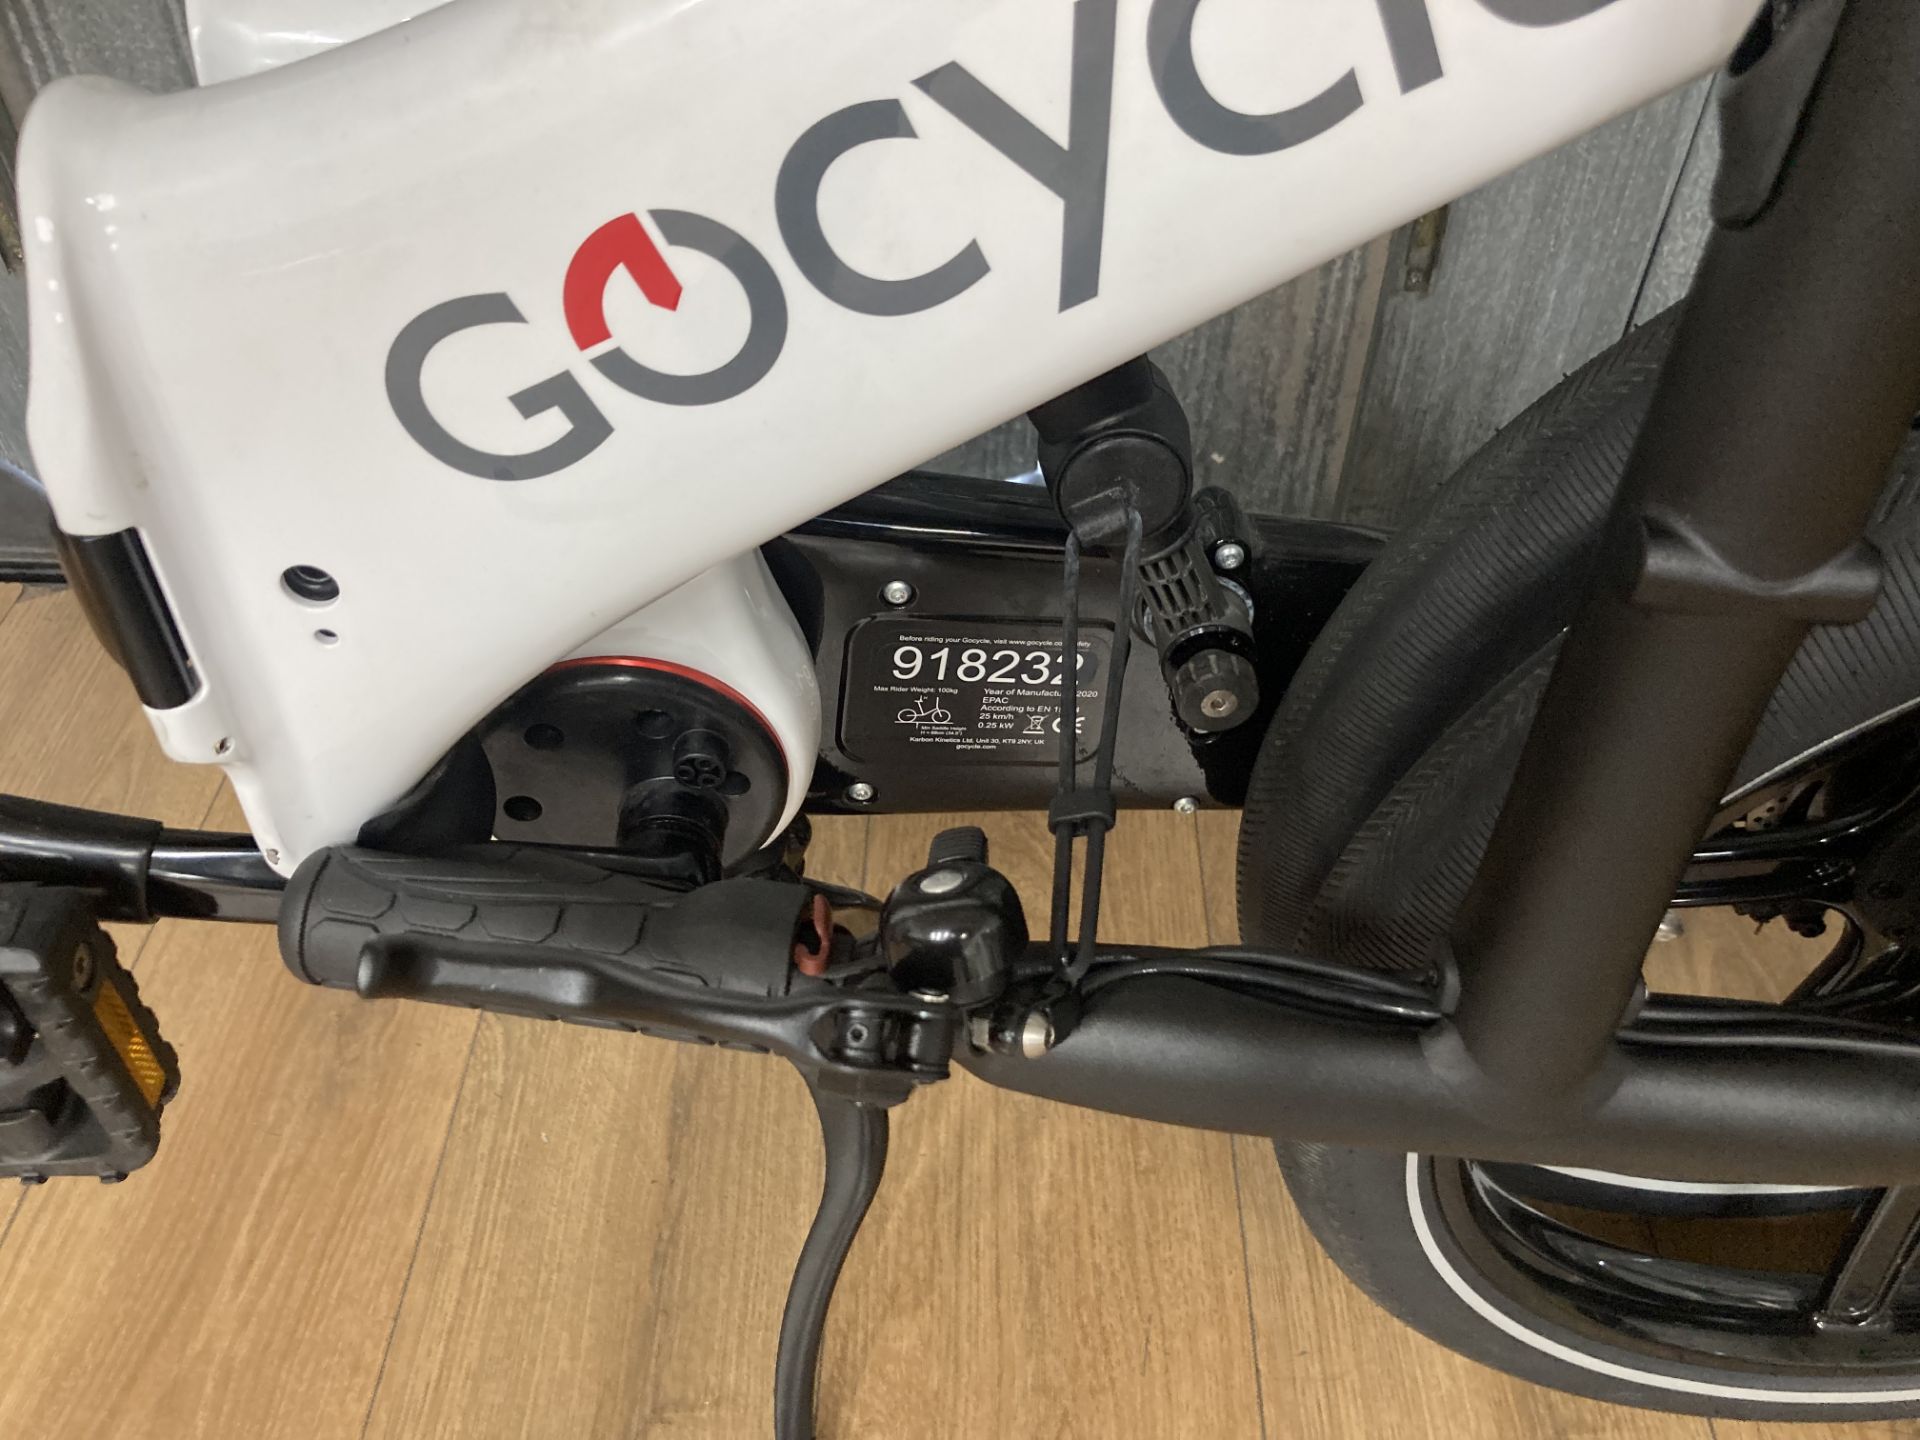 Gocycle GX White/gloss black No battery pack - Image 2 of 3